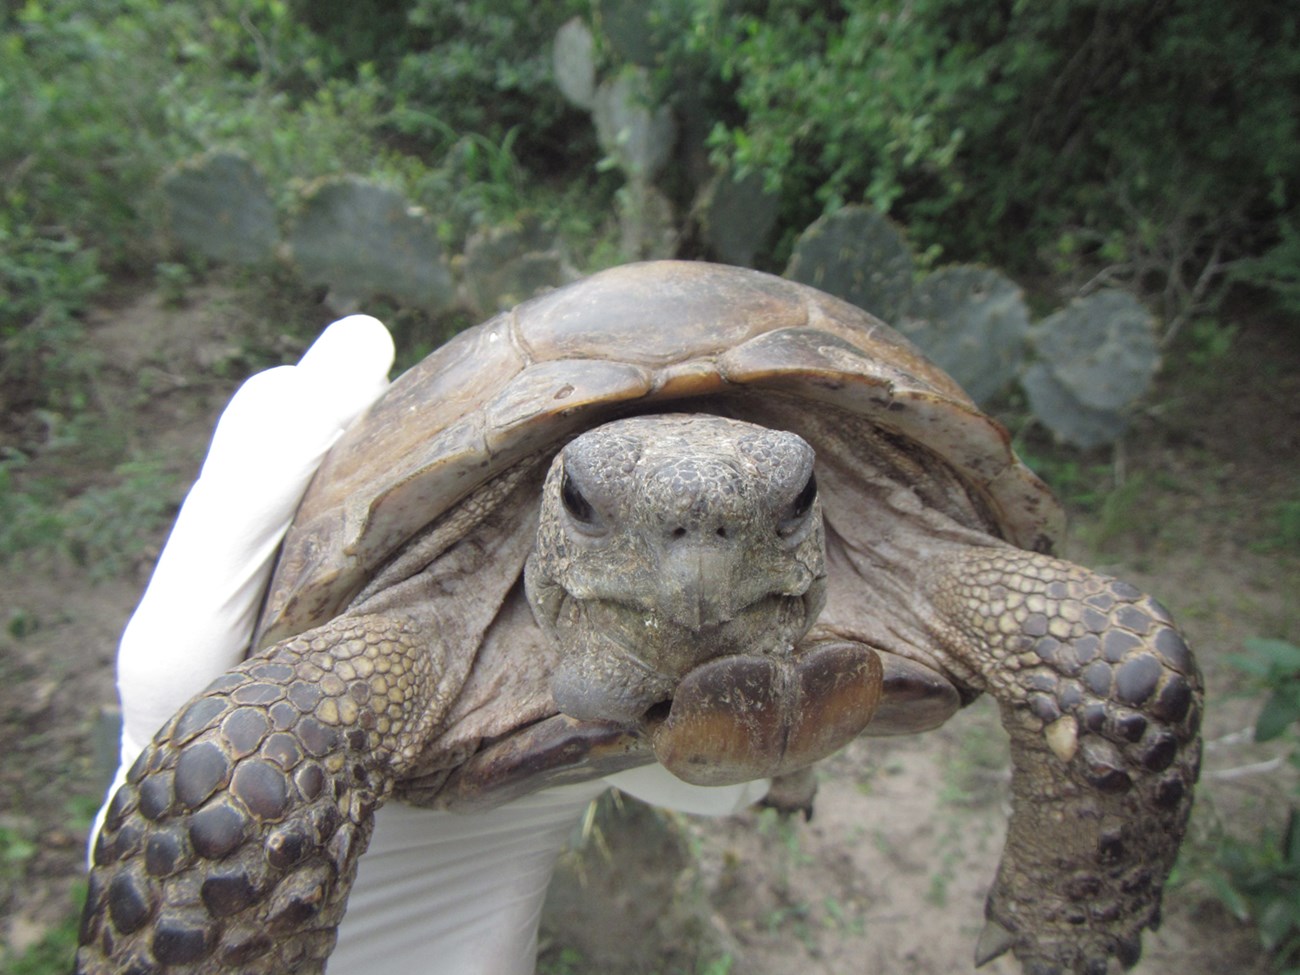 a large texas tortoise being held by a gloved hand